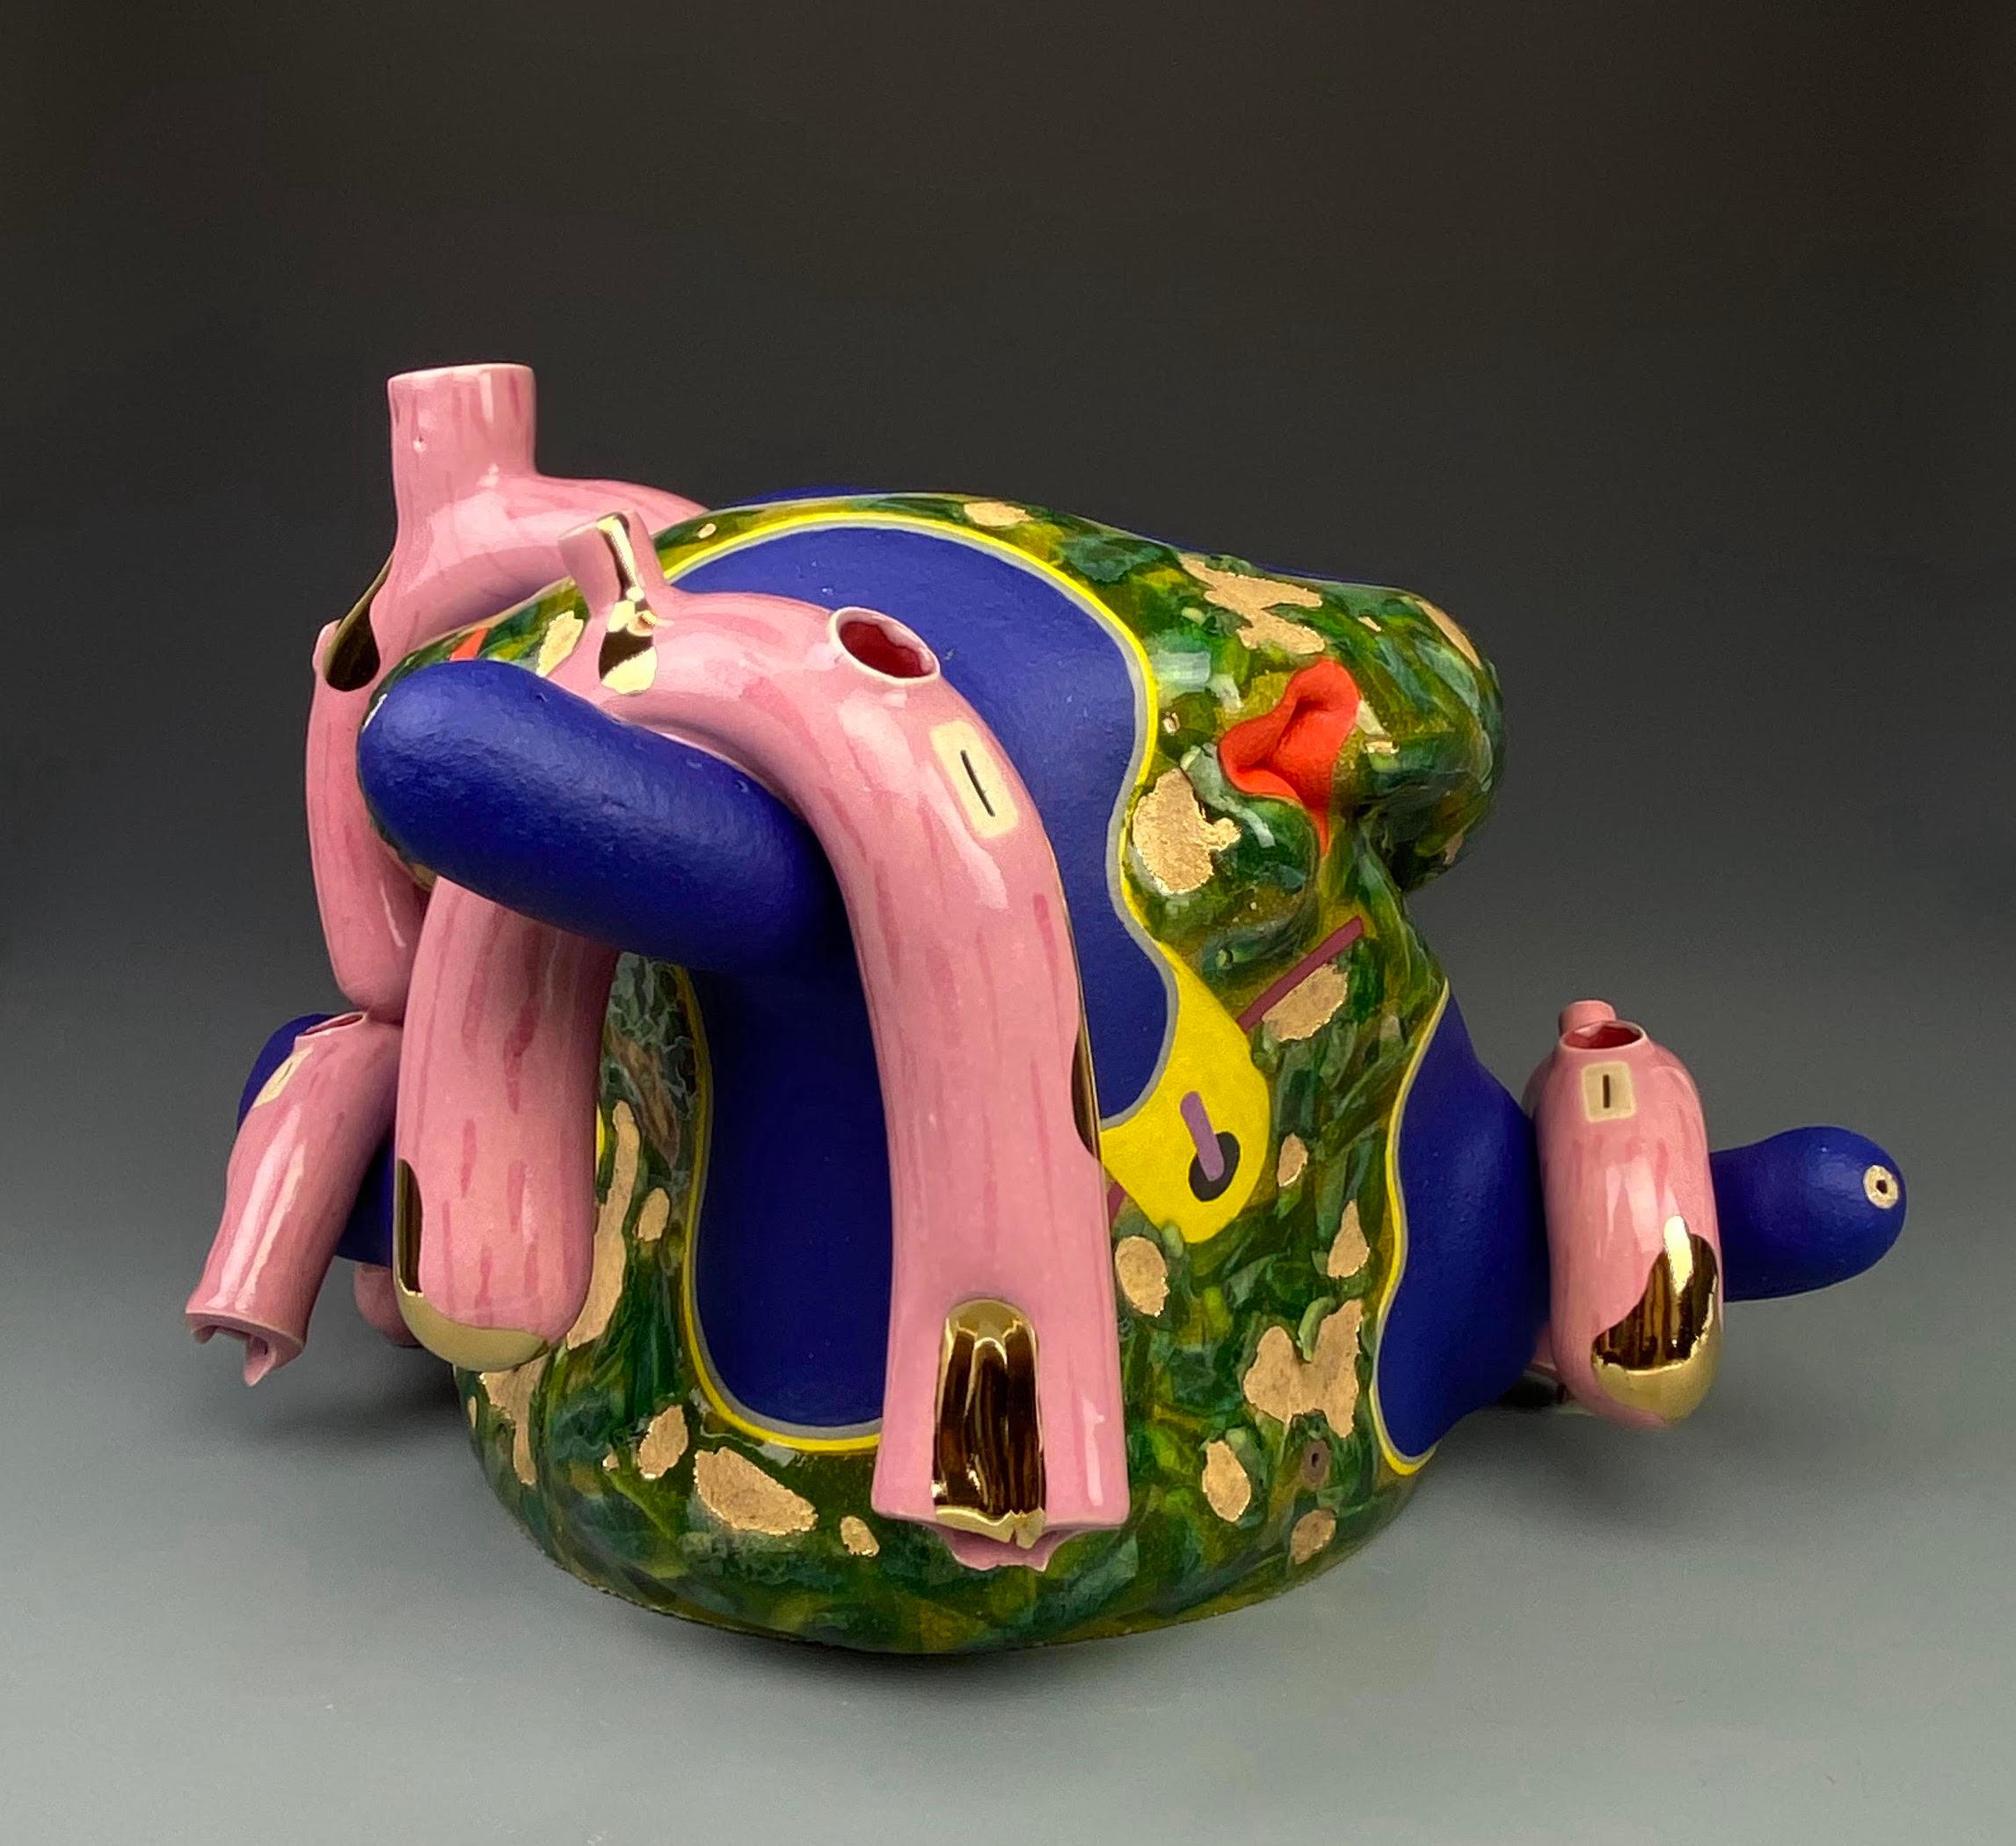 José Sierra is a self-taught artist and ceramicist, born in Mérida, Venezuela in 1975. His work draws inspiration from his  heritage, along with pre-Hispanic art, East Asian pottery, and contemporary design. His work teems with super-saturated